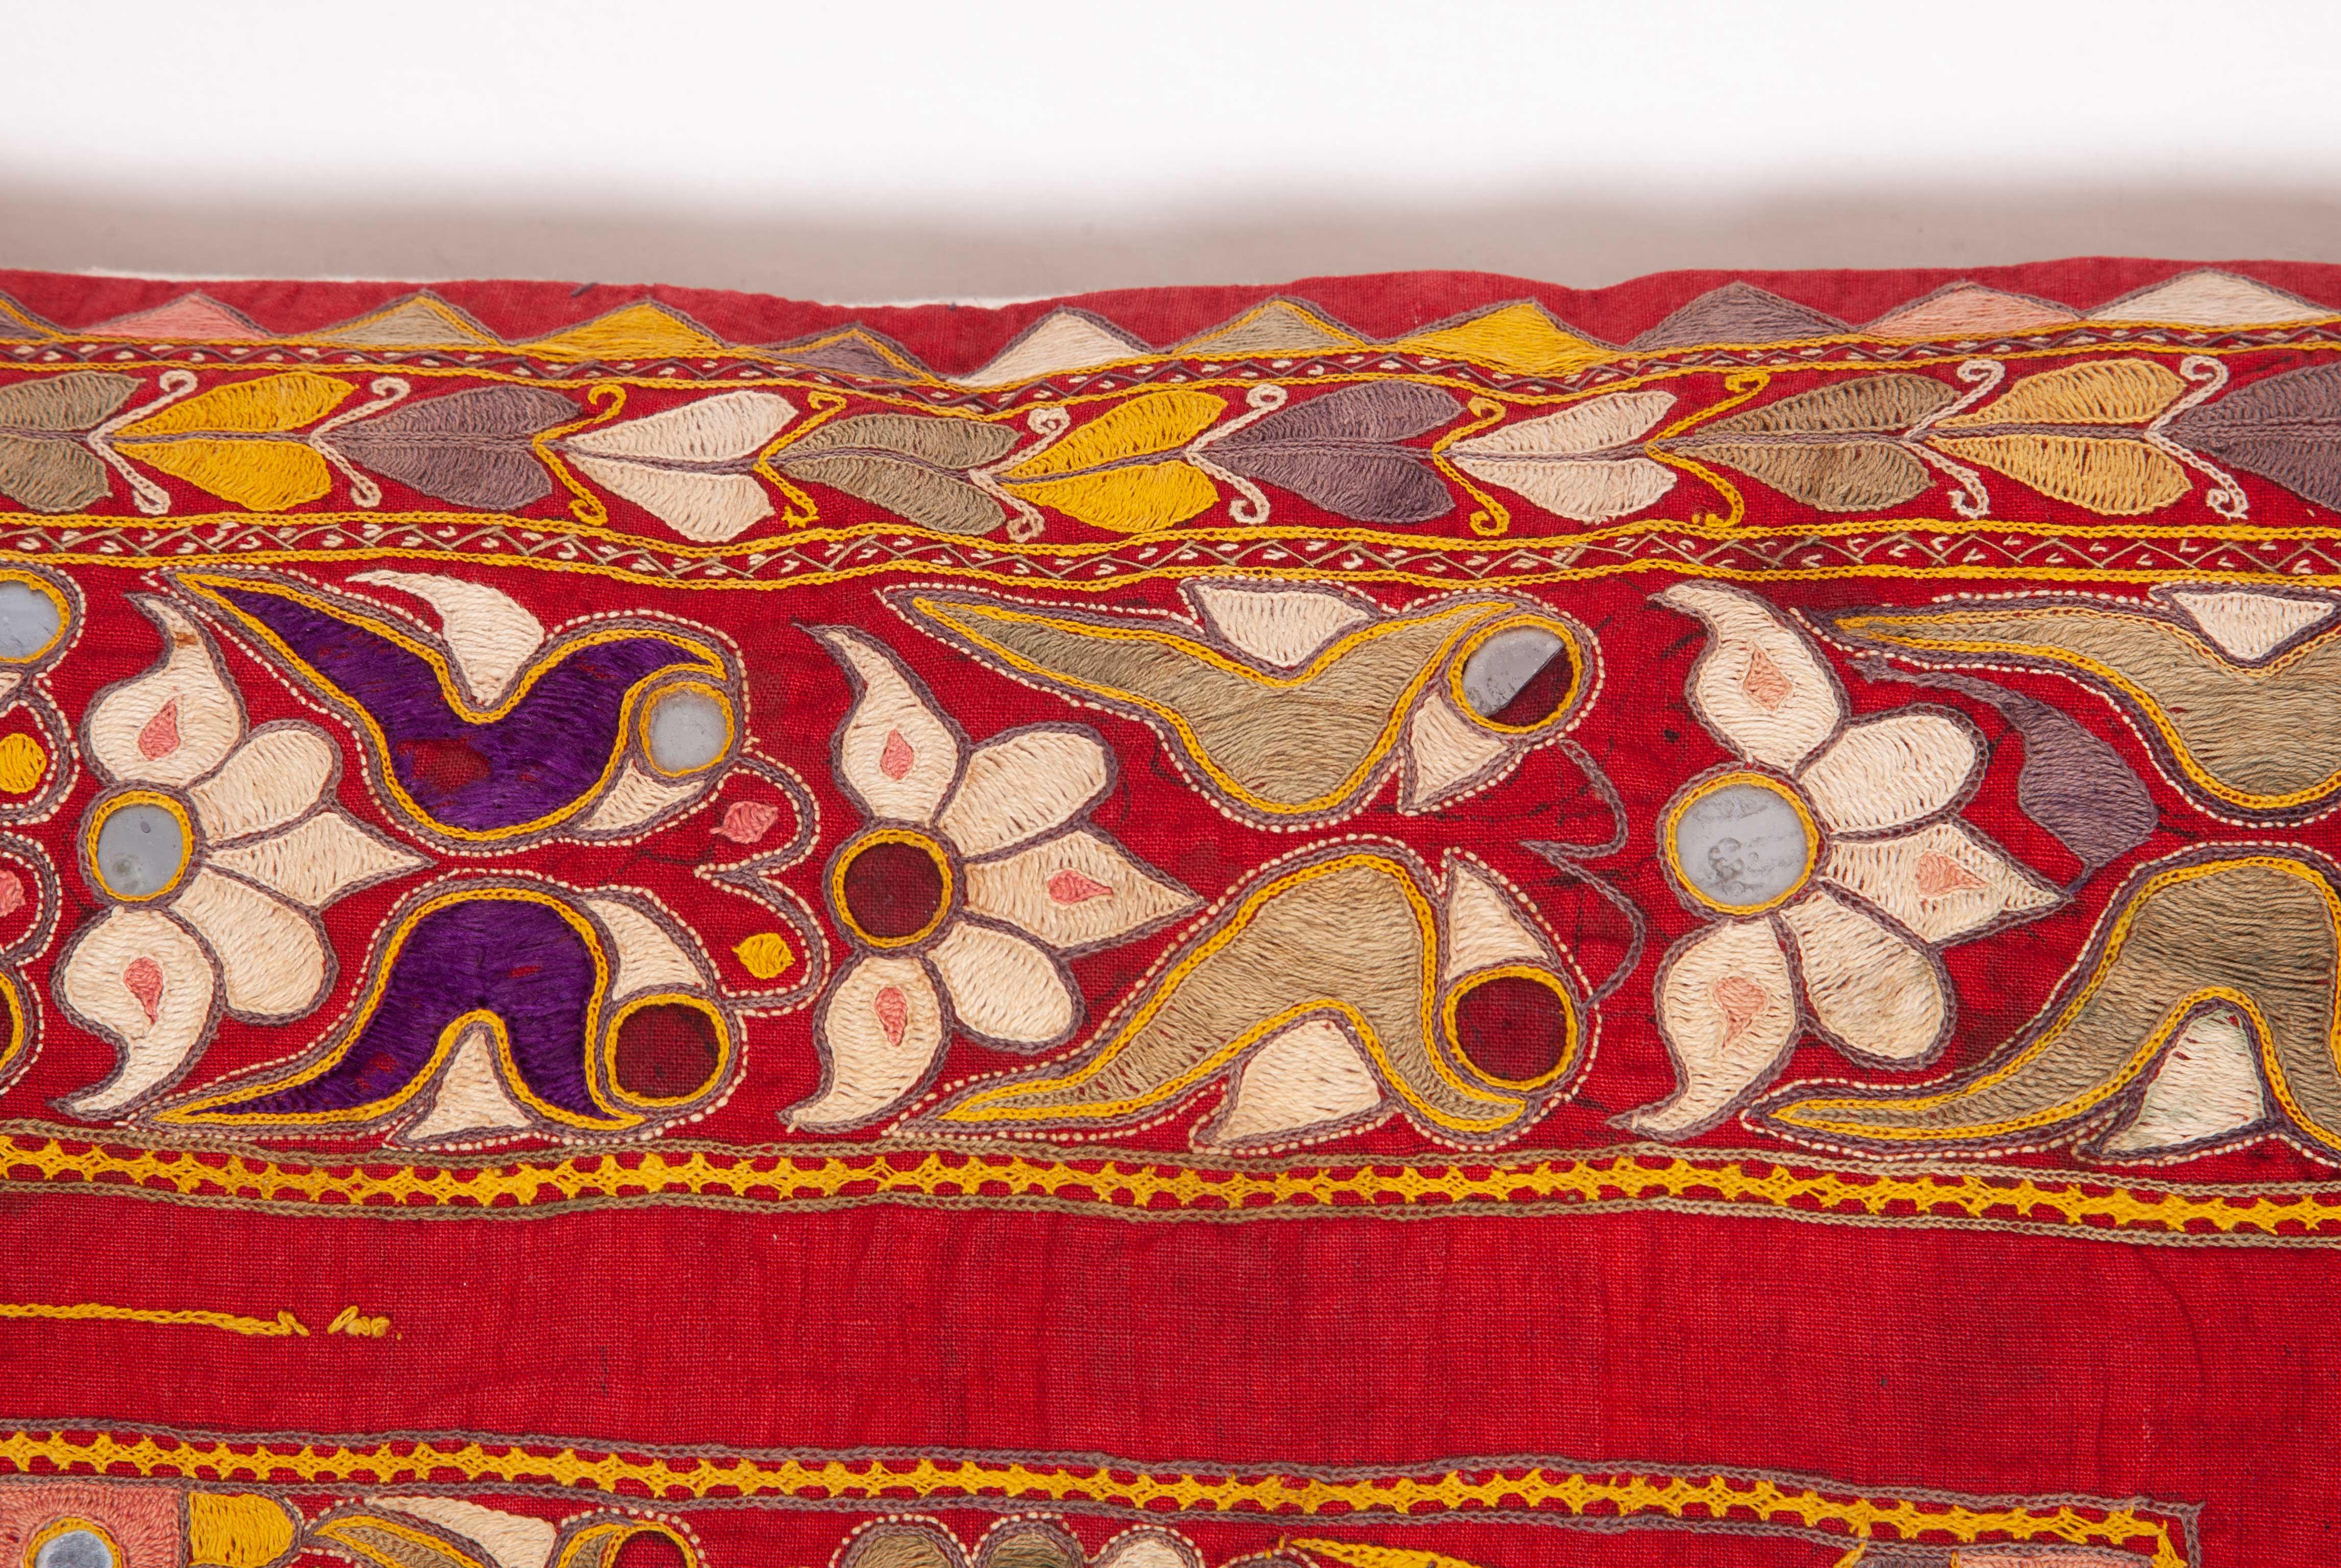 Embroidered Pillow Case Made from an Early 20th Century Embroidery from Rajastan